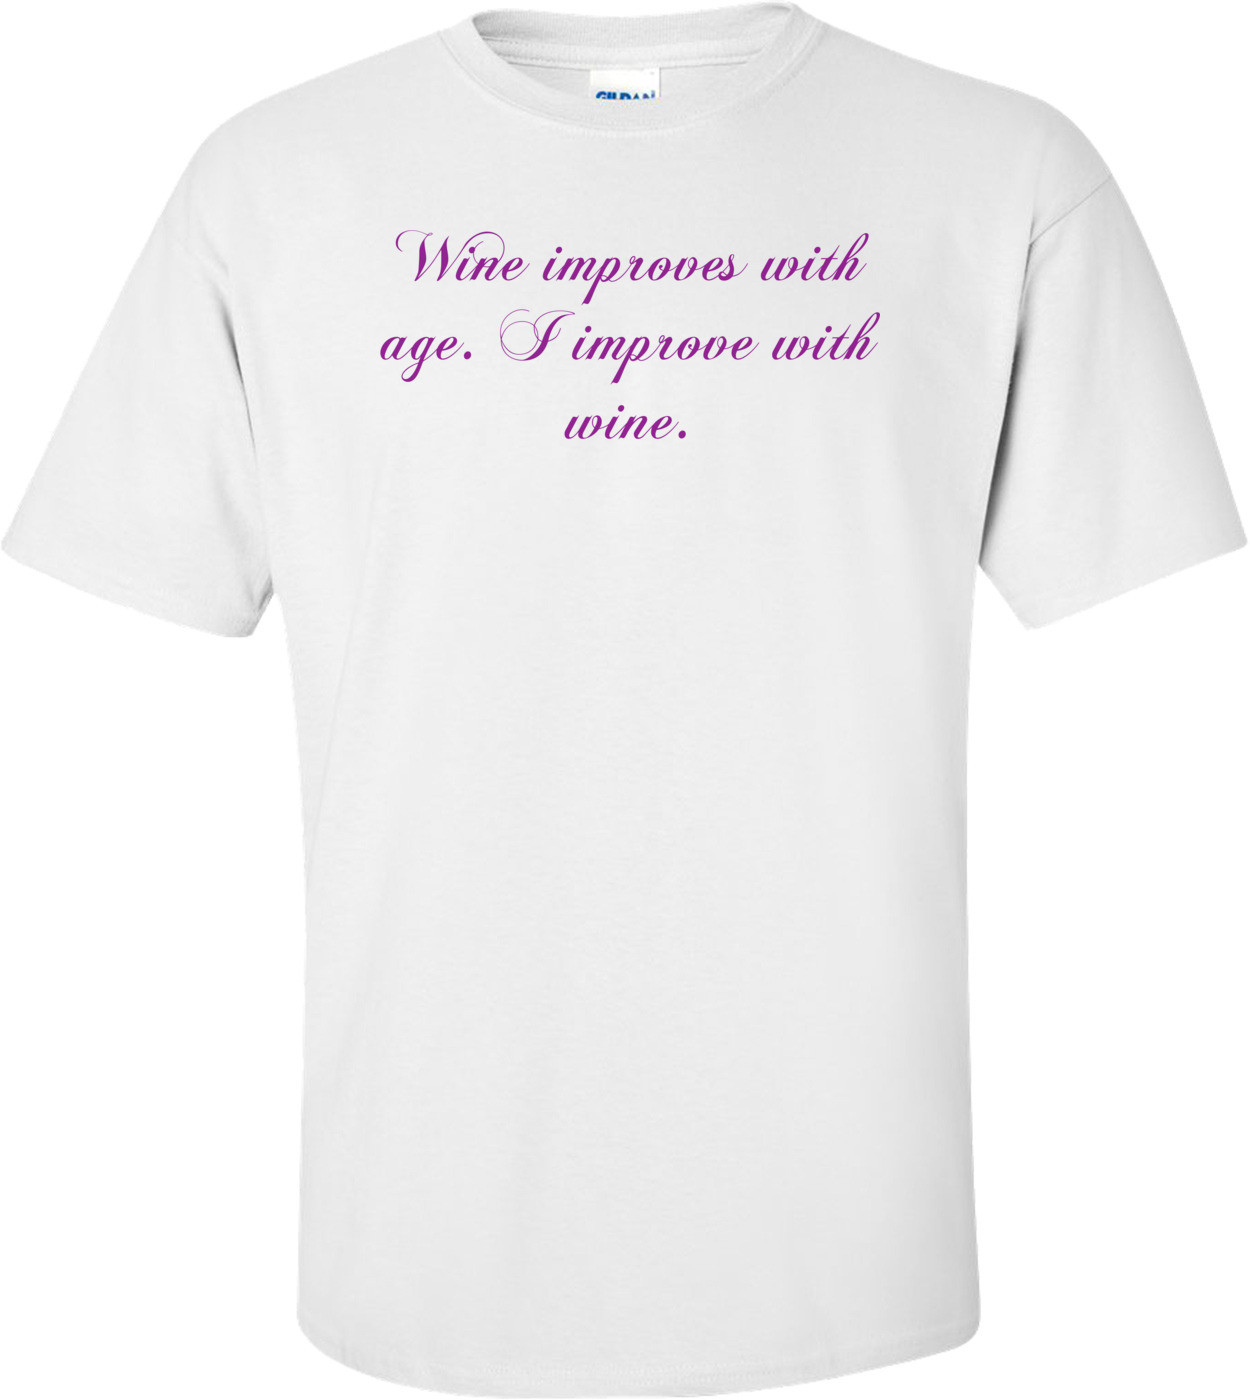 Wine improves with age. I improve with wine. Shirt